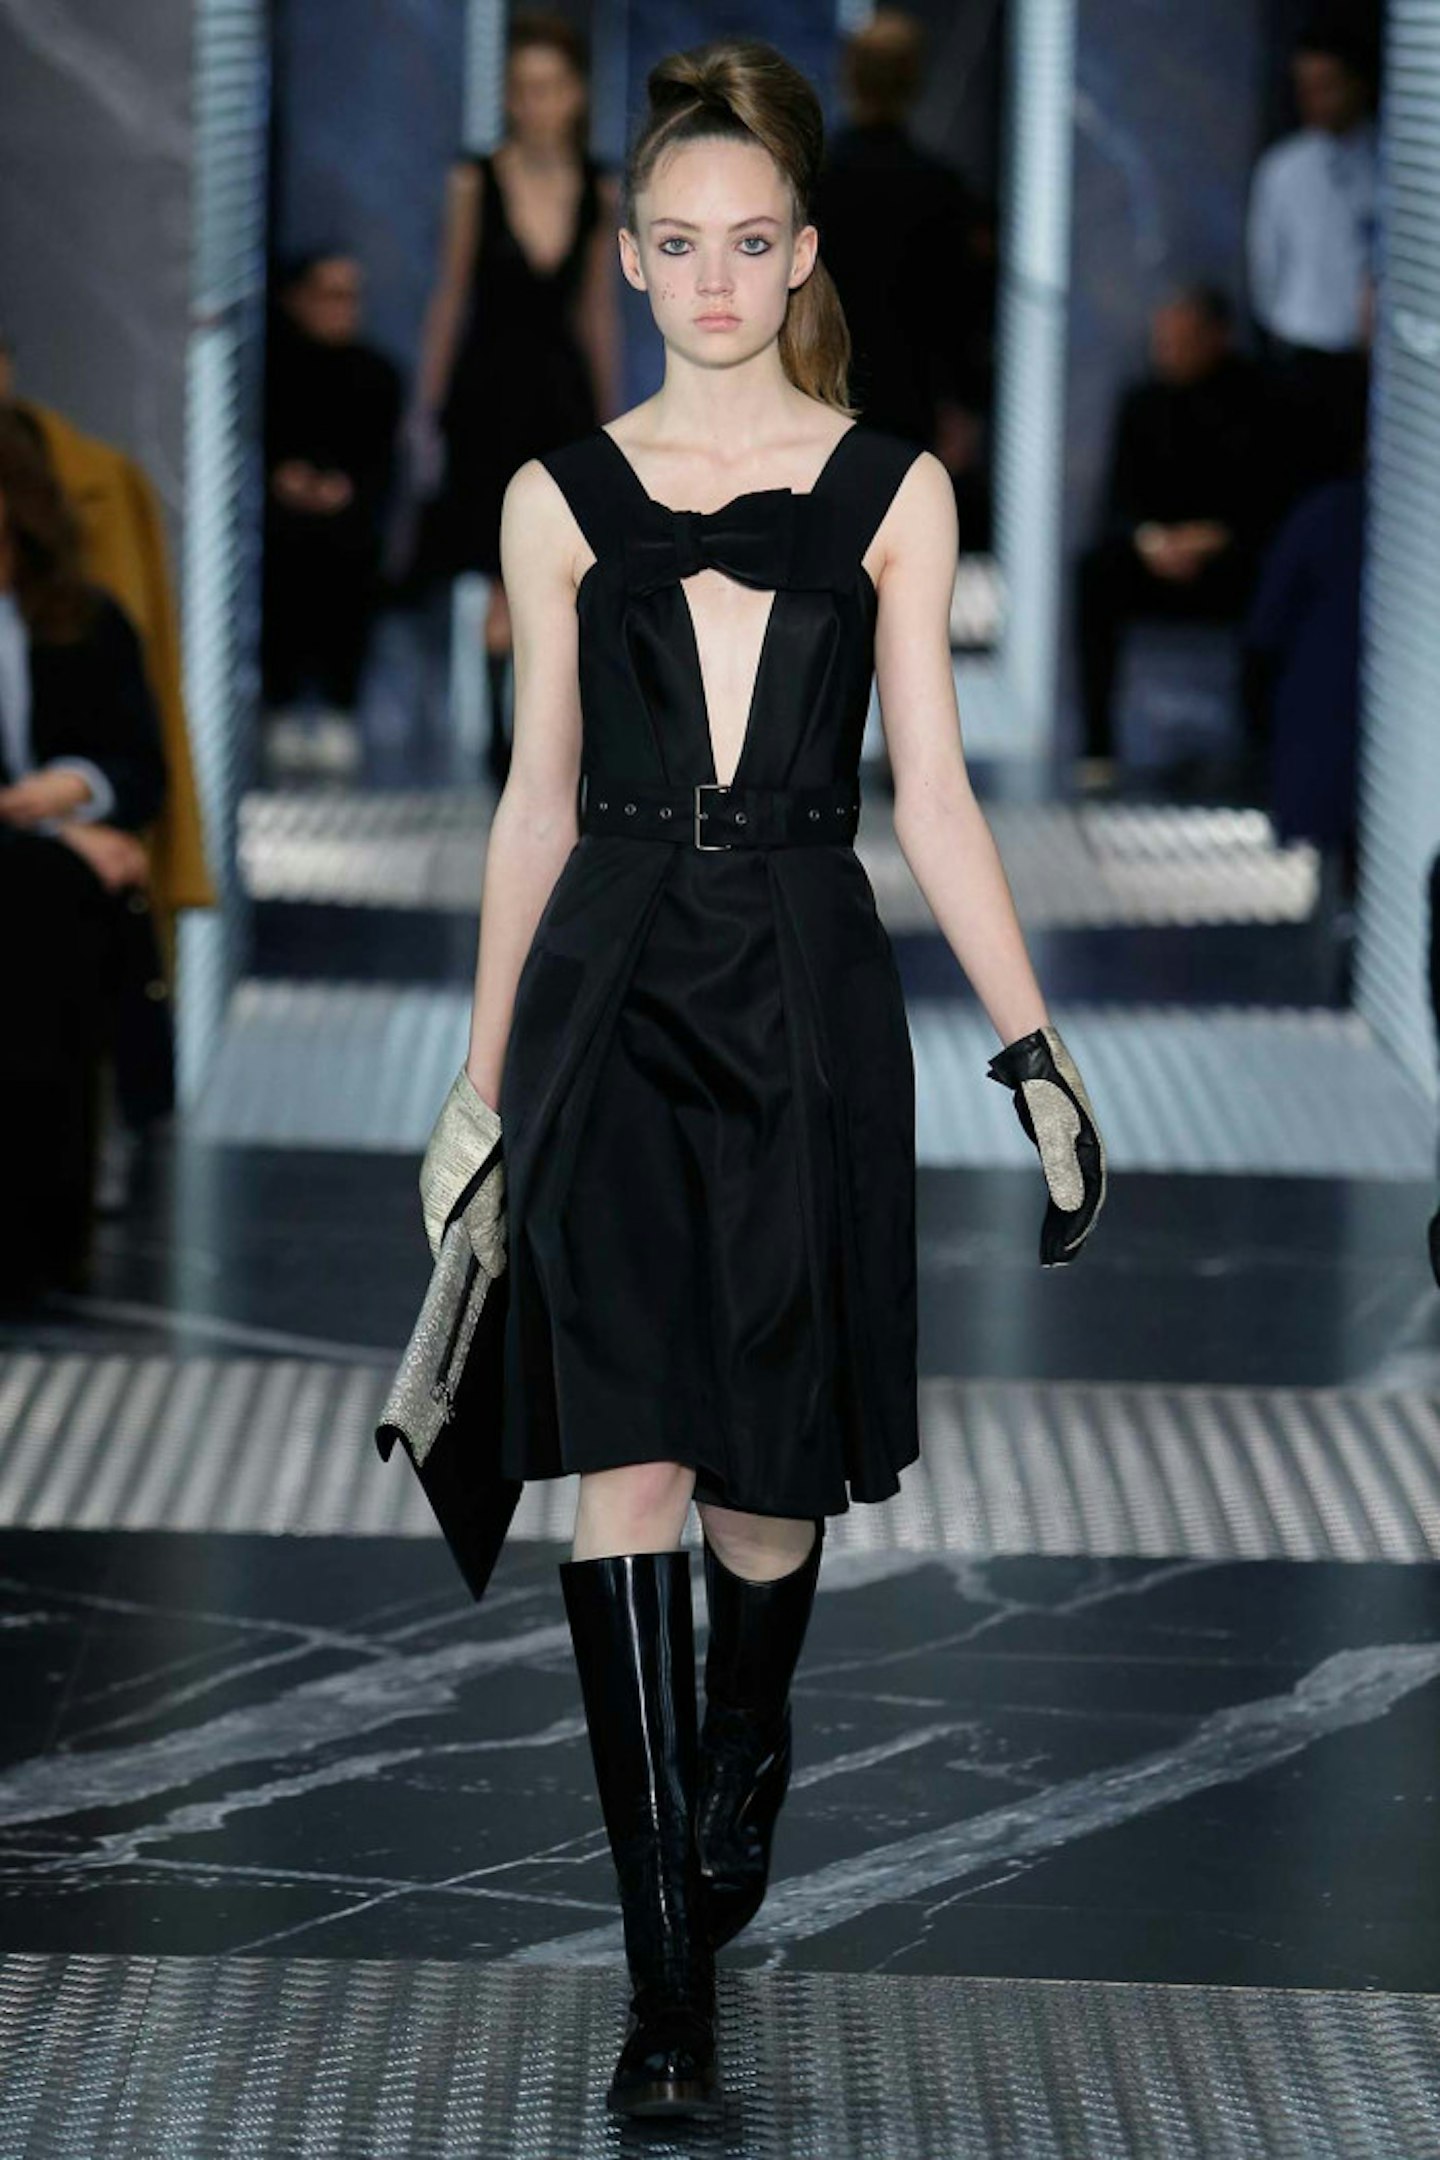 This Prada number is totally perfect for boat hopping right?